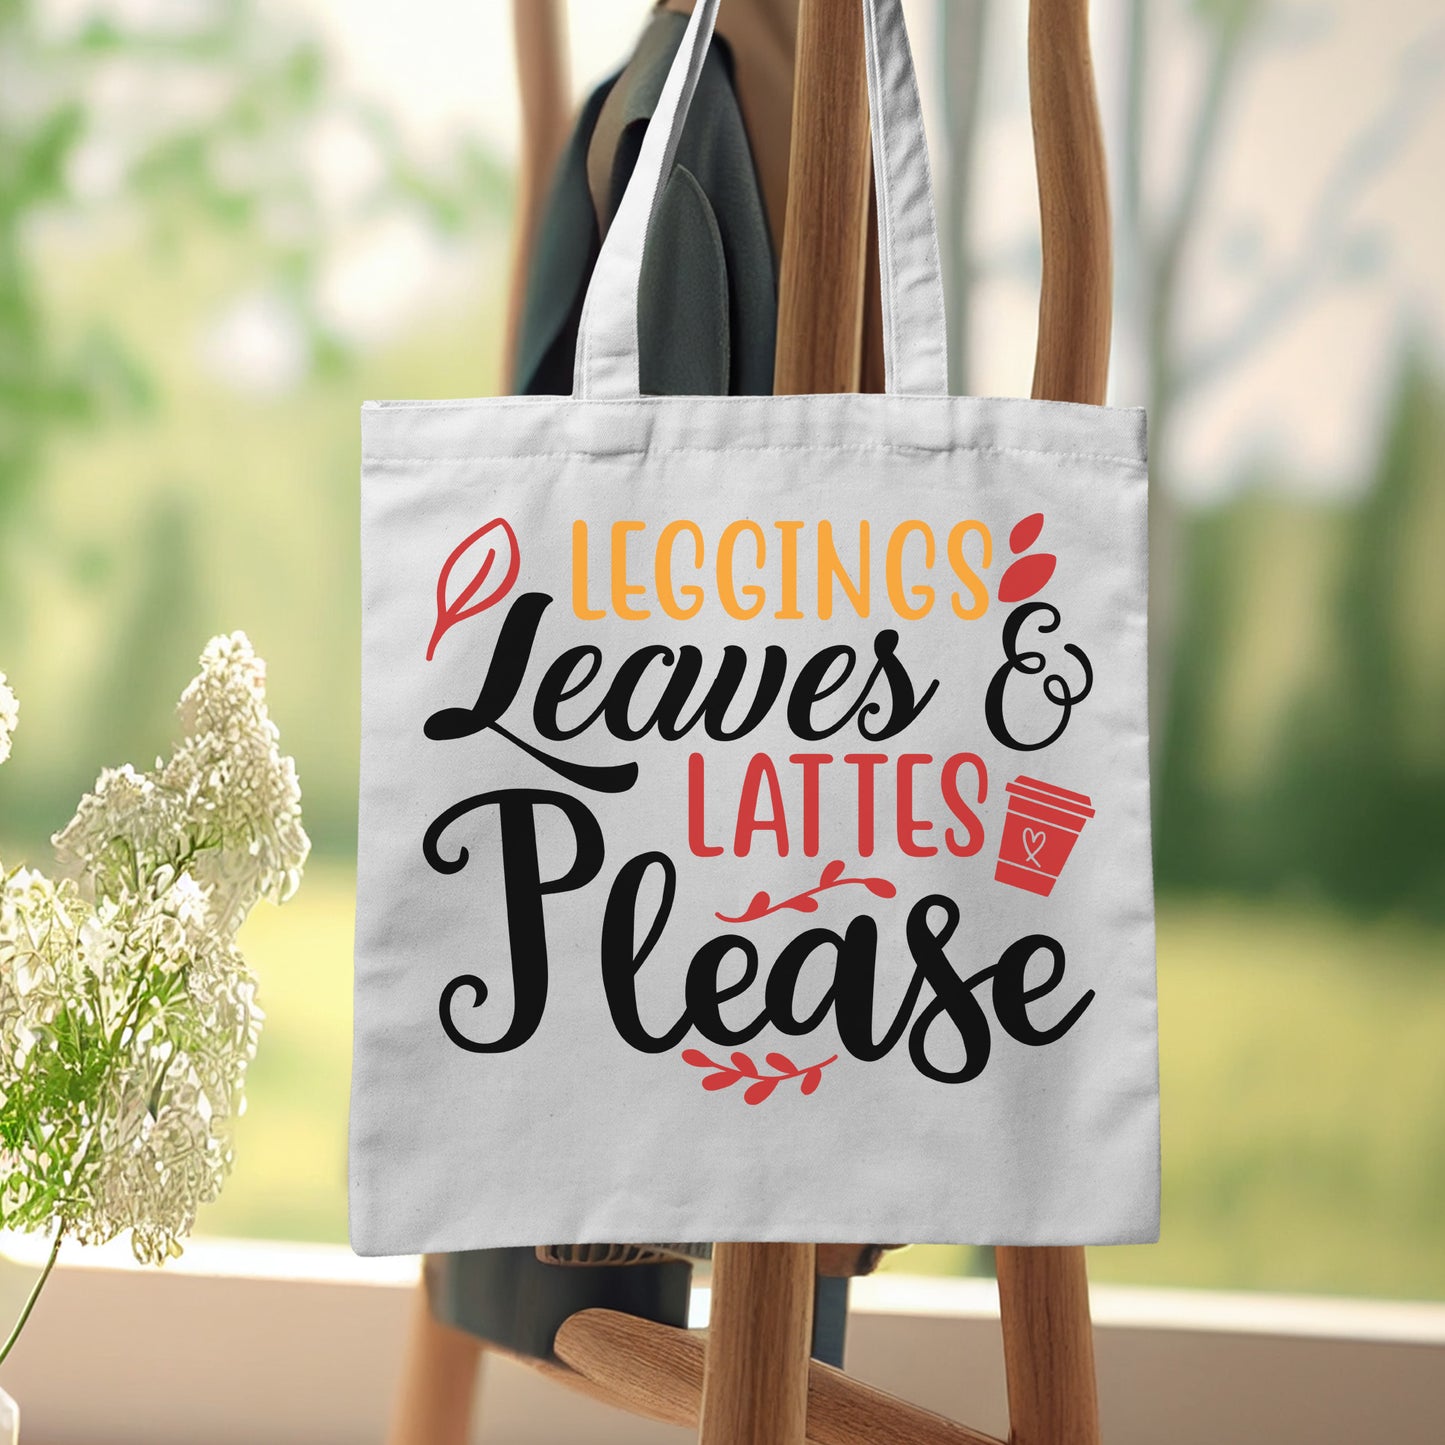 "Leggings Leaves & Lattes Please With Heart" Graphic